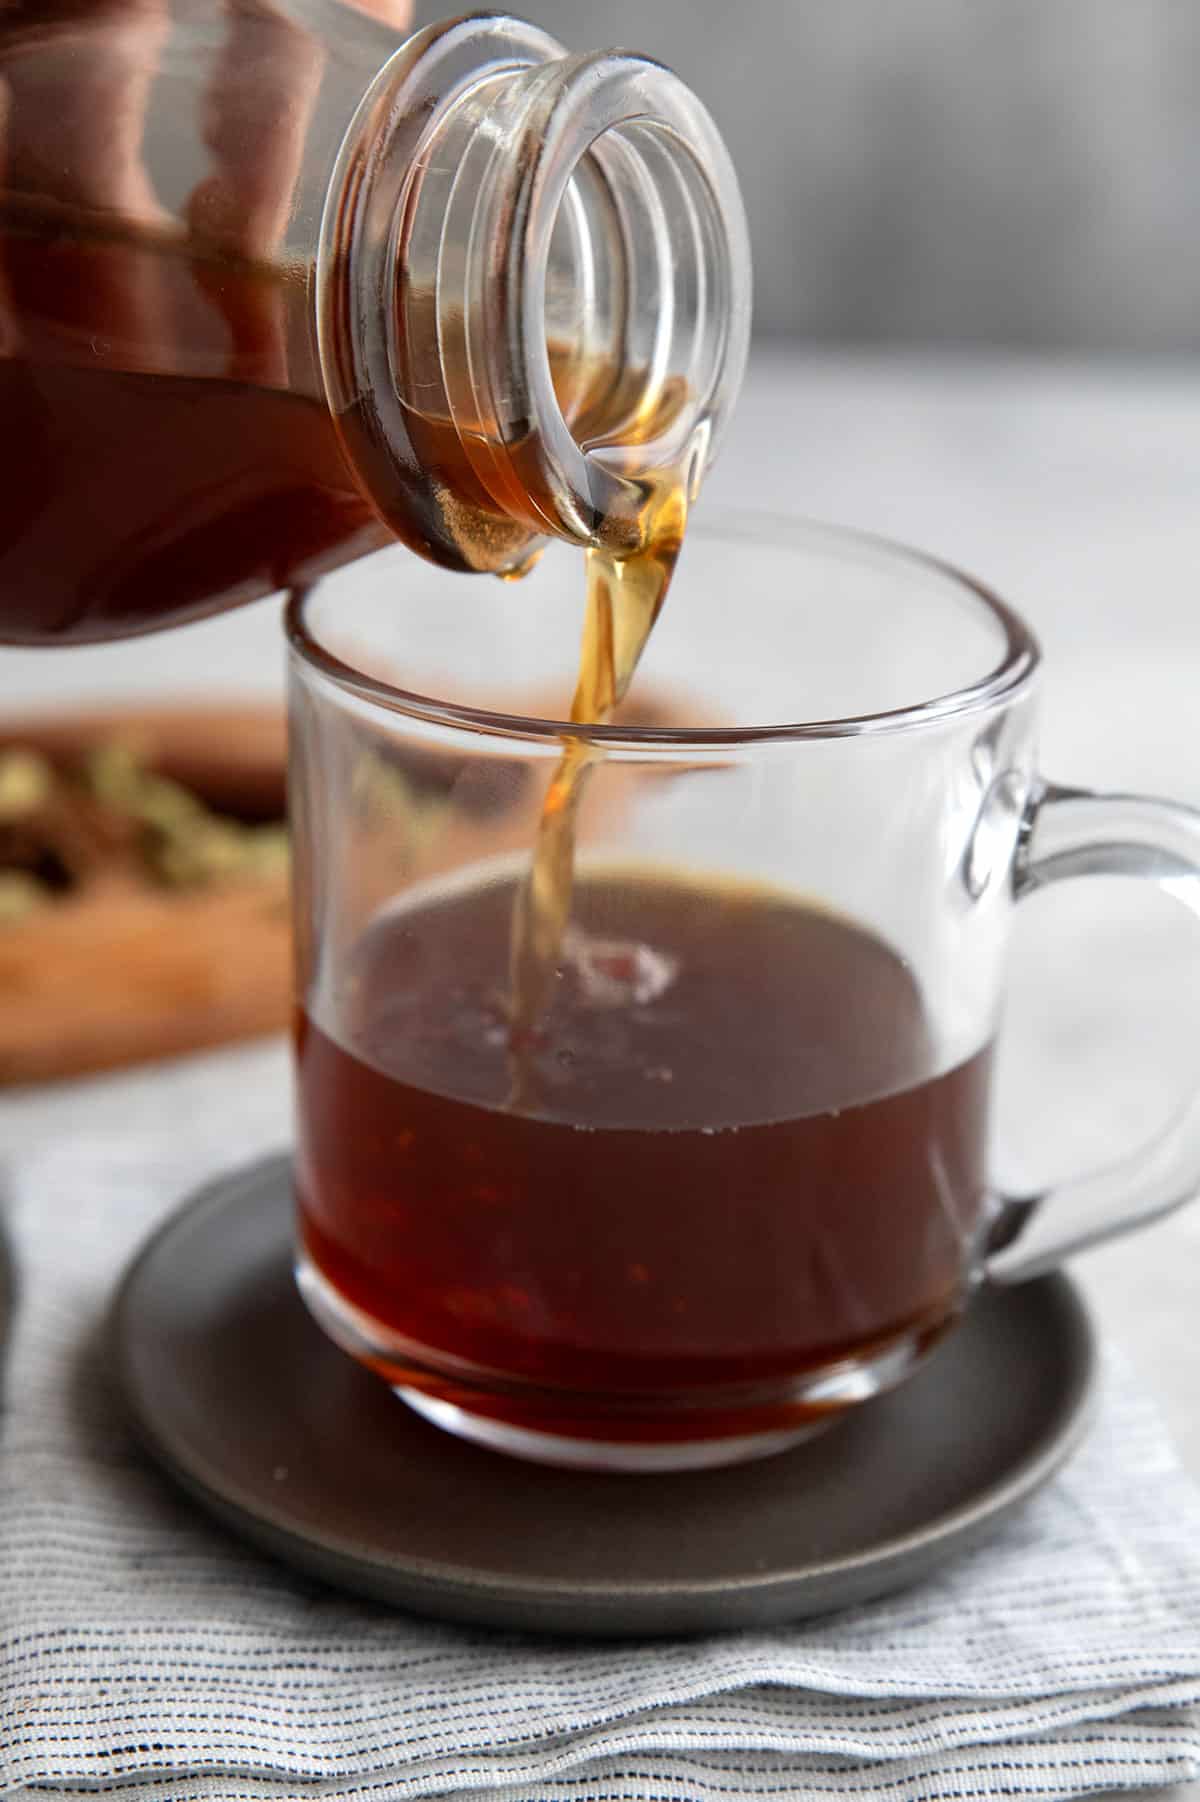 Sugar Free Chai Concentrate pouring from a bottle into a glass mug.